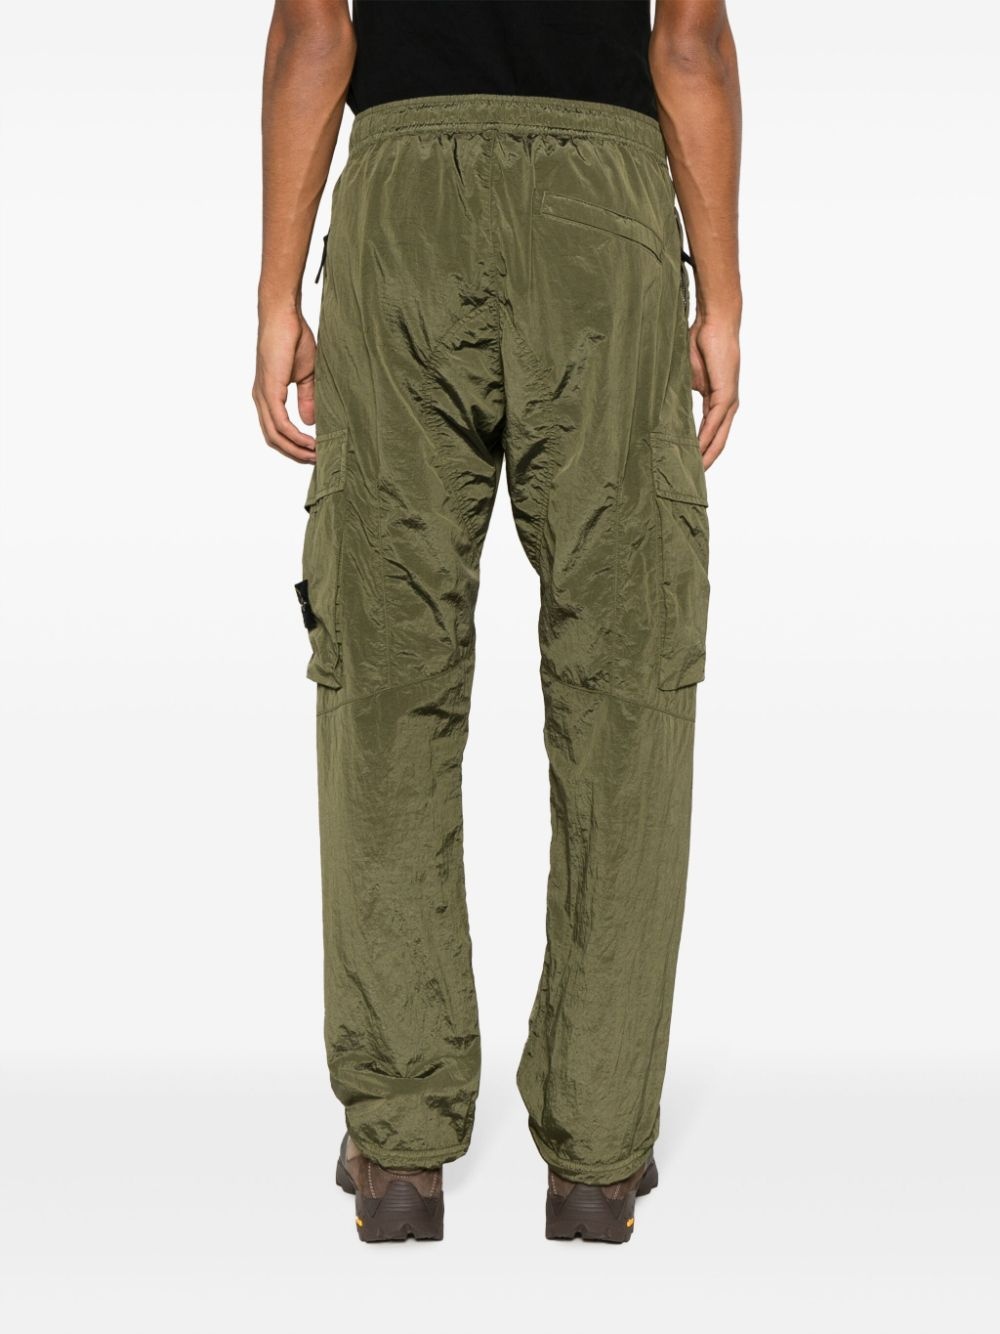 Stone Island - Slim-Fit Garment-Dyed Cotton-Blend Twill Cargo Trousers -  Green Stone Island